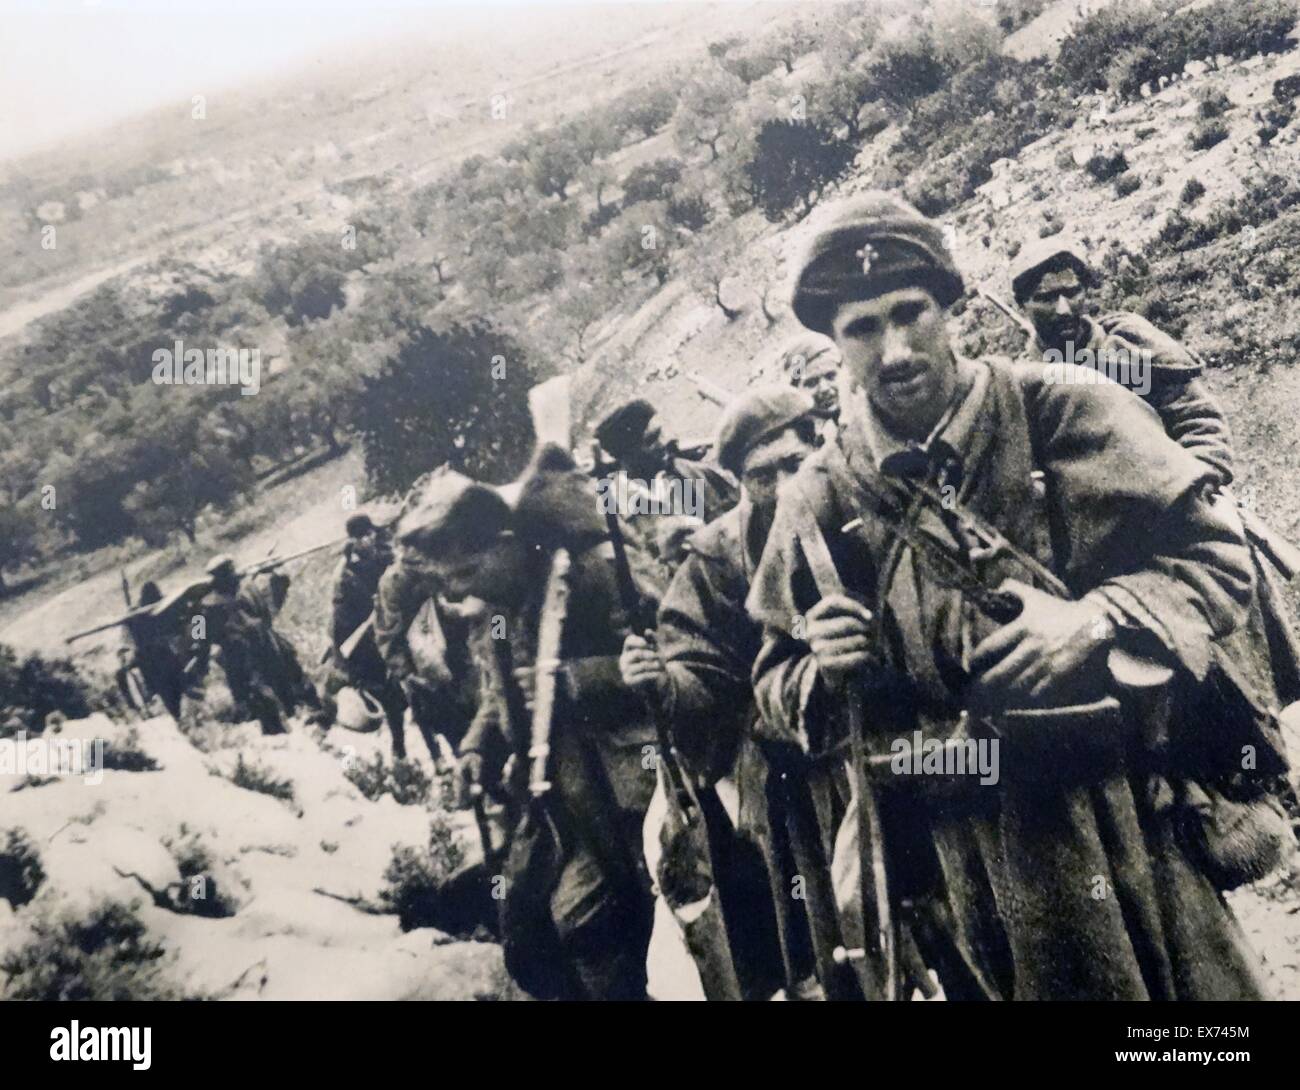 Nationalist soldiers pass through hills in Spain, during the Spanish Civil War Stock Photo